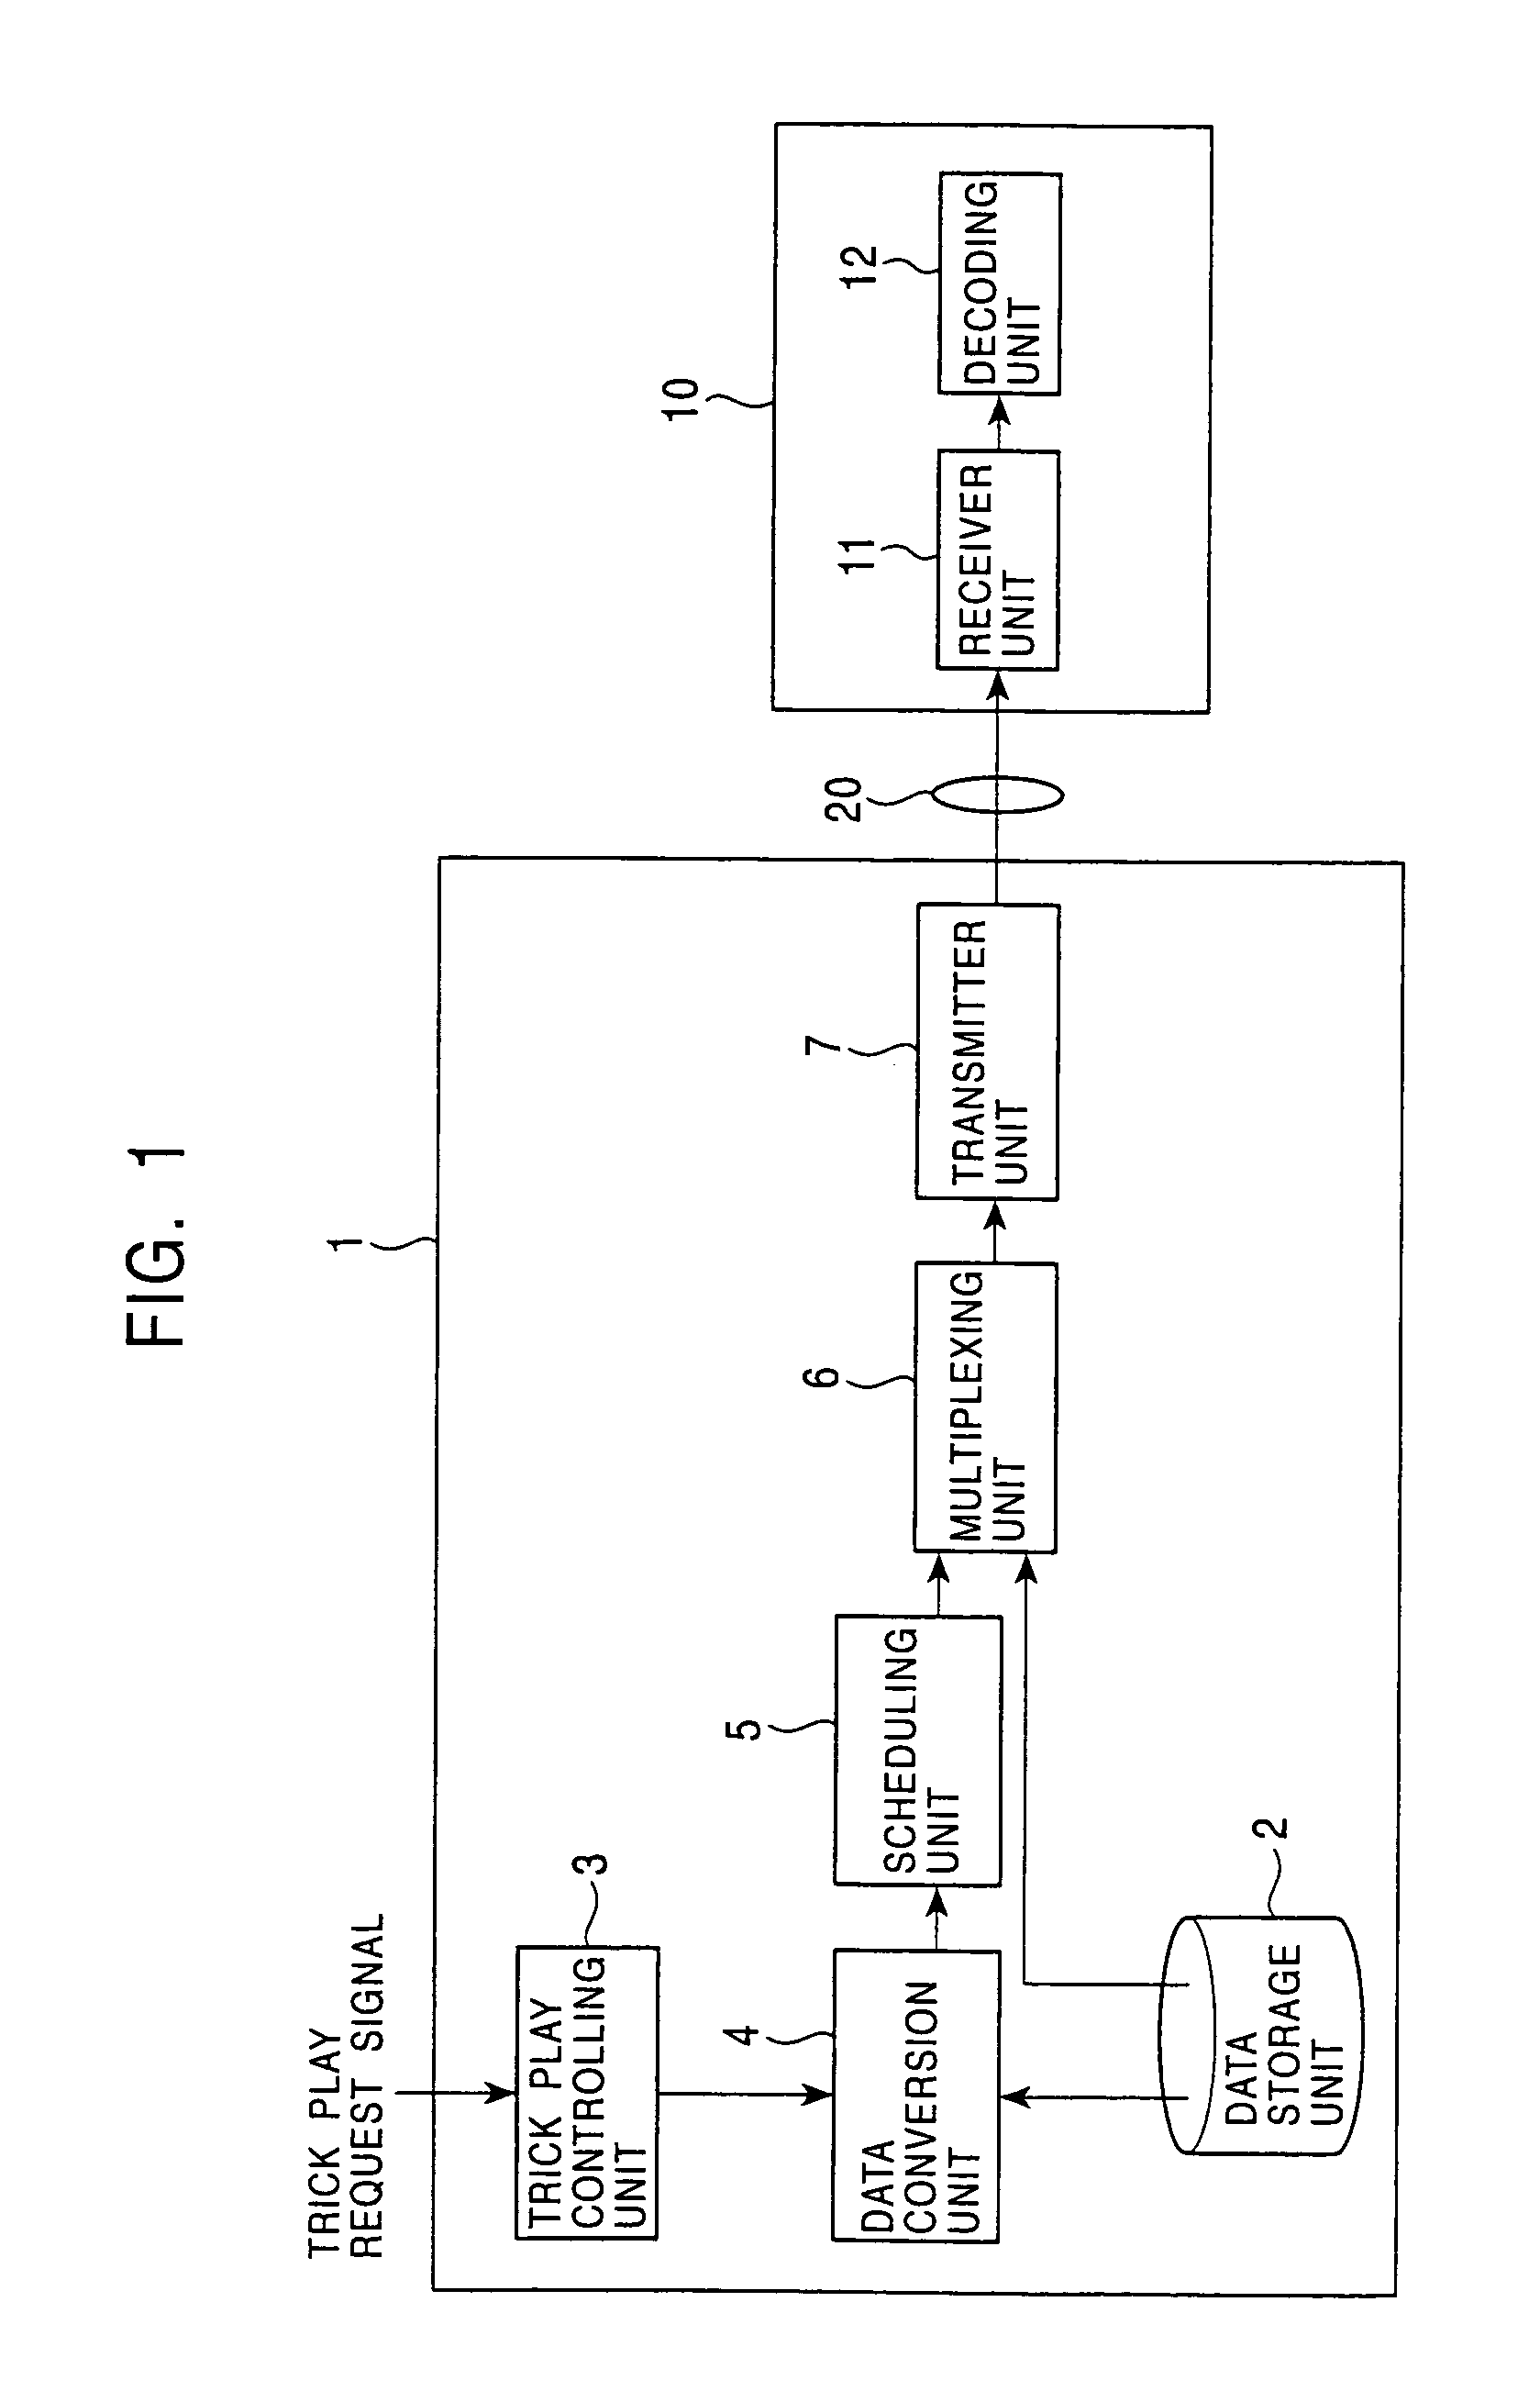 Method and apparatus for conversion and distribution of data utilizing trick-play requests and meta-data information